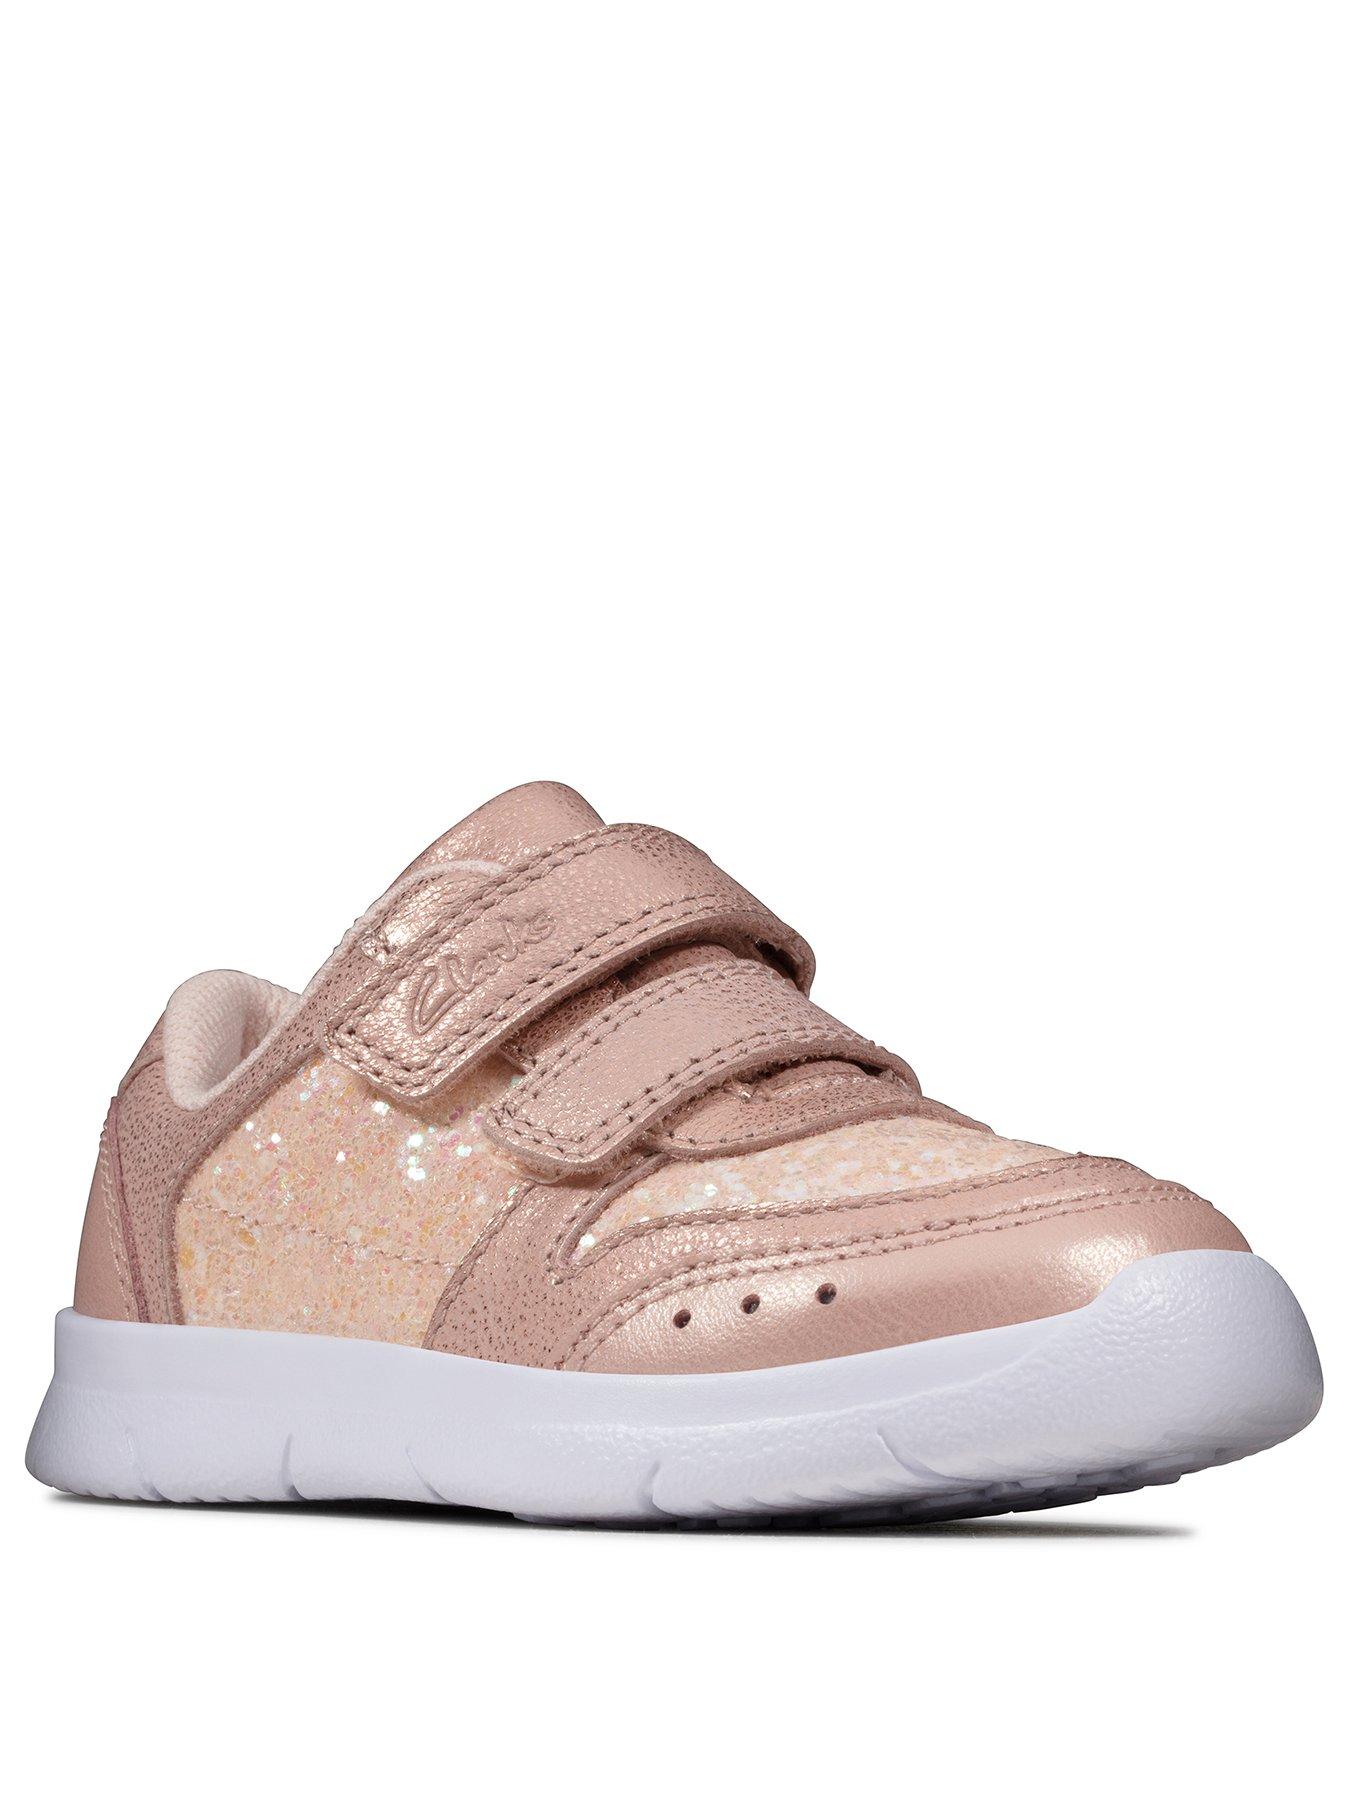 Clarks Toddler Girls Ath Sonar Trainers 